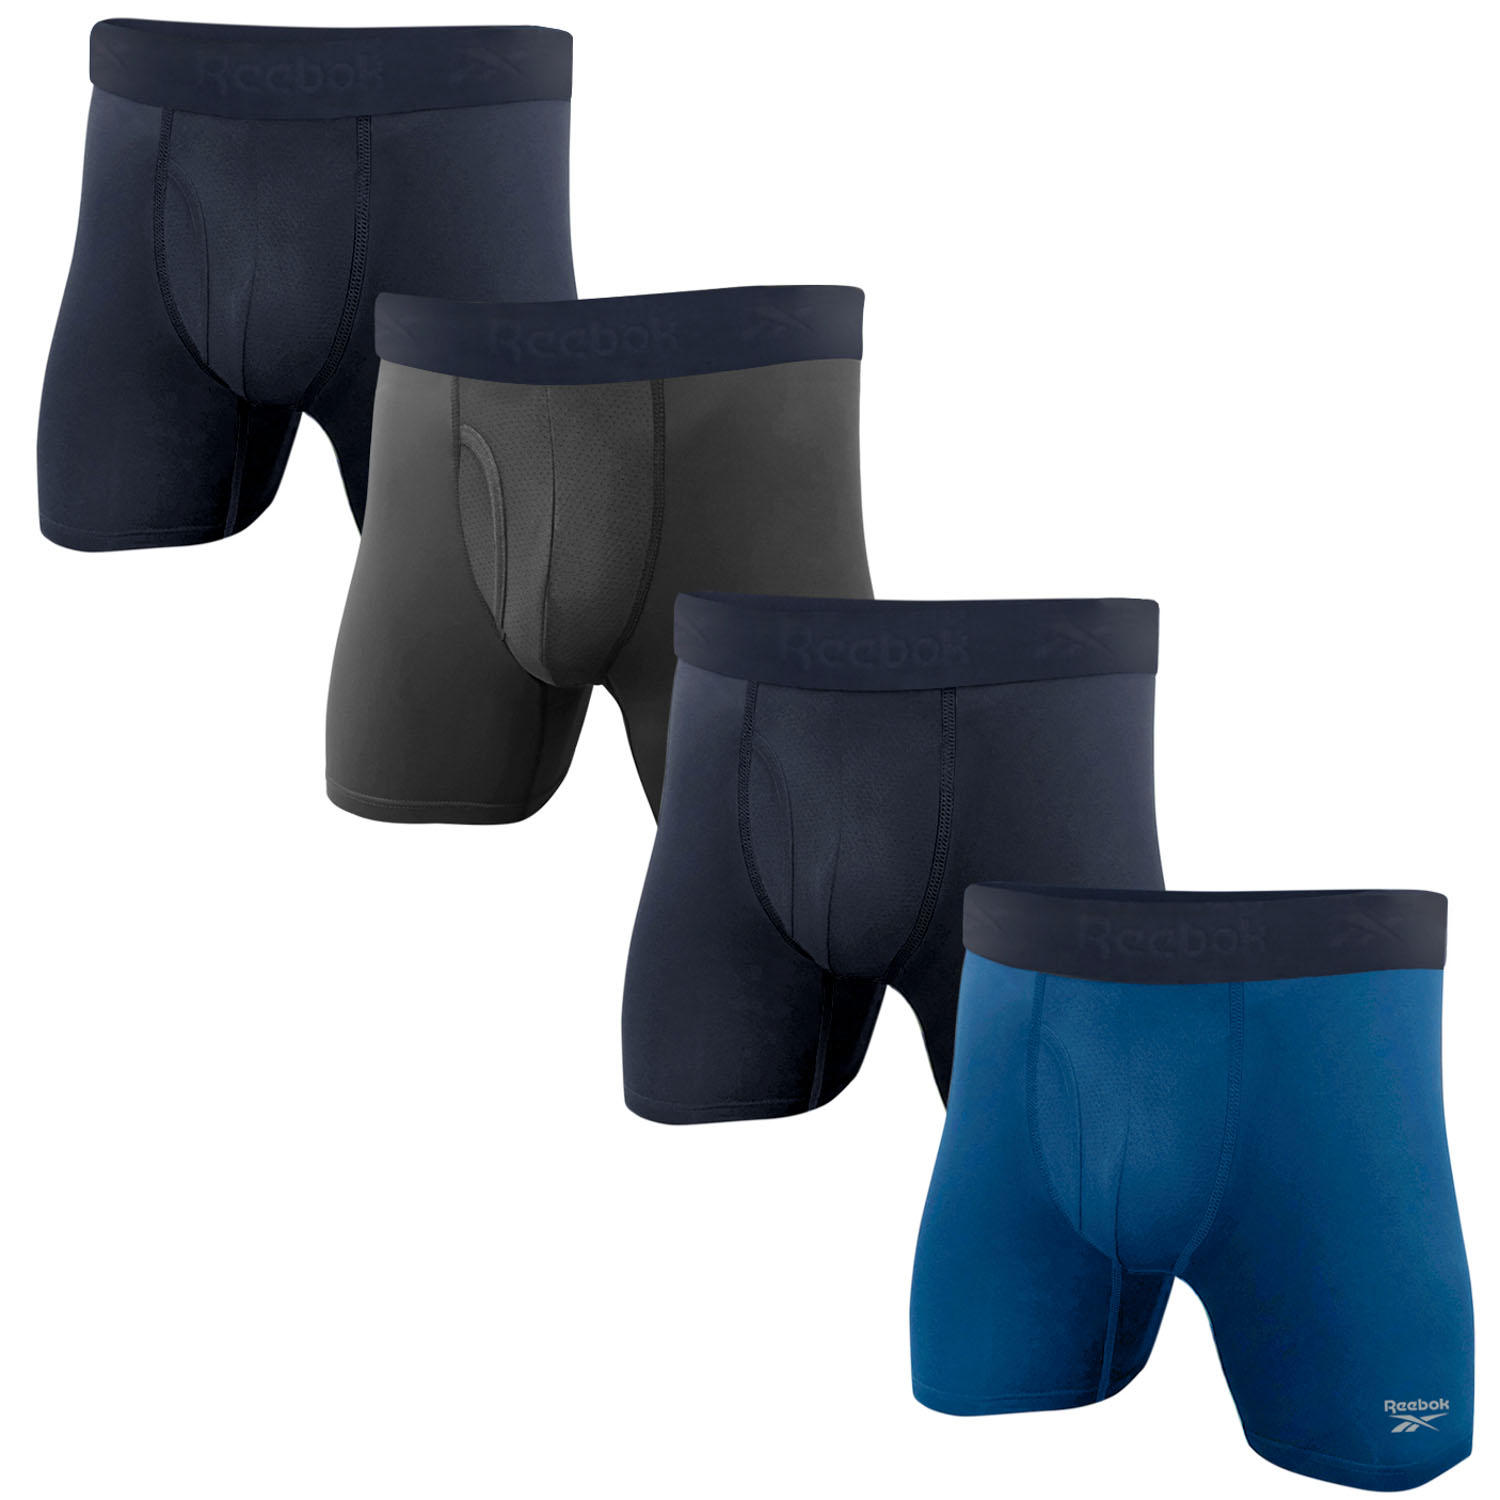 Reebok Mens 4 Pack Performance Boxer Briefs with Comfort Pouch - Navy/Grey/Navy/Blue Small